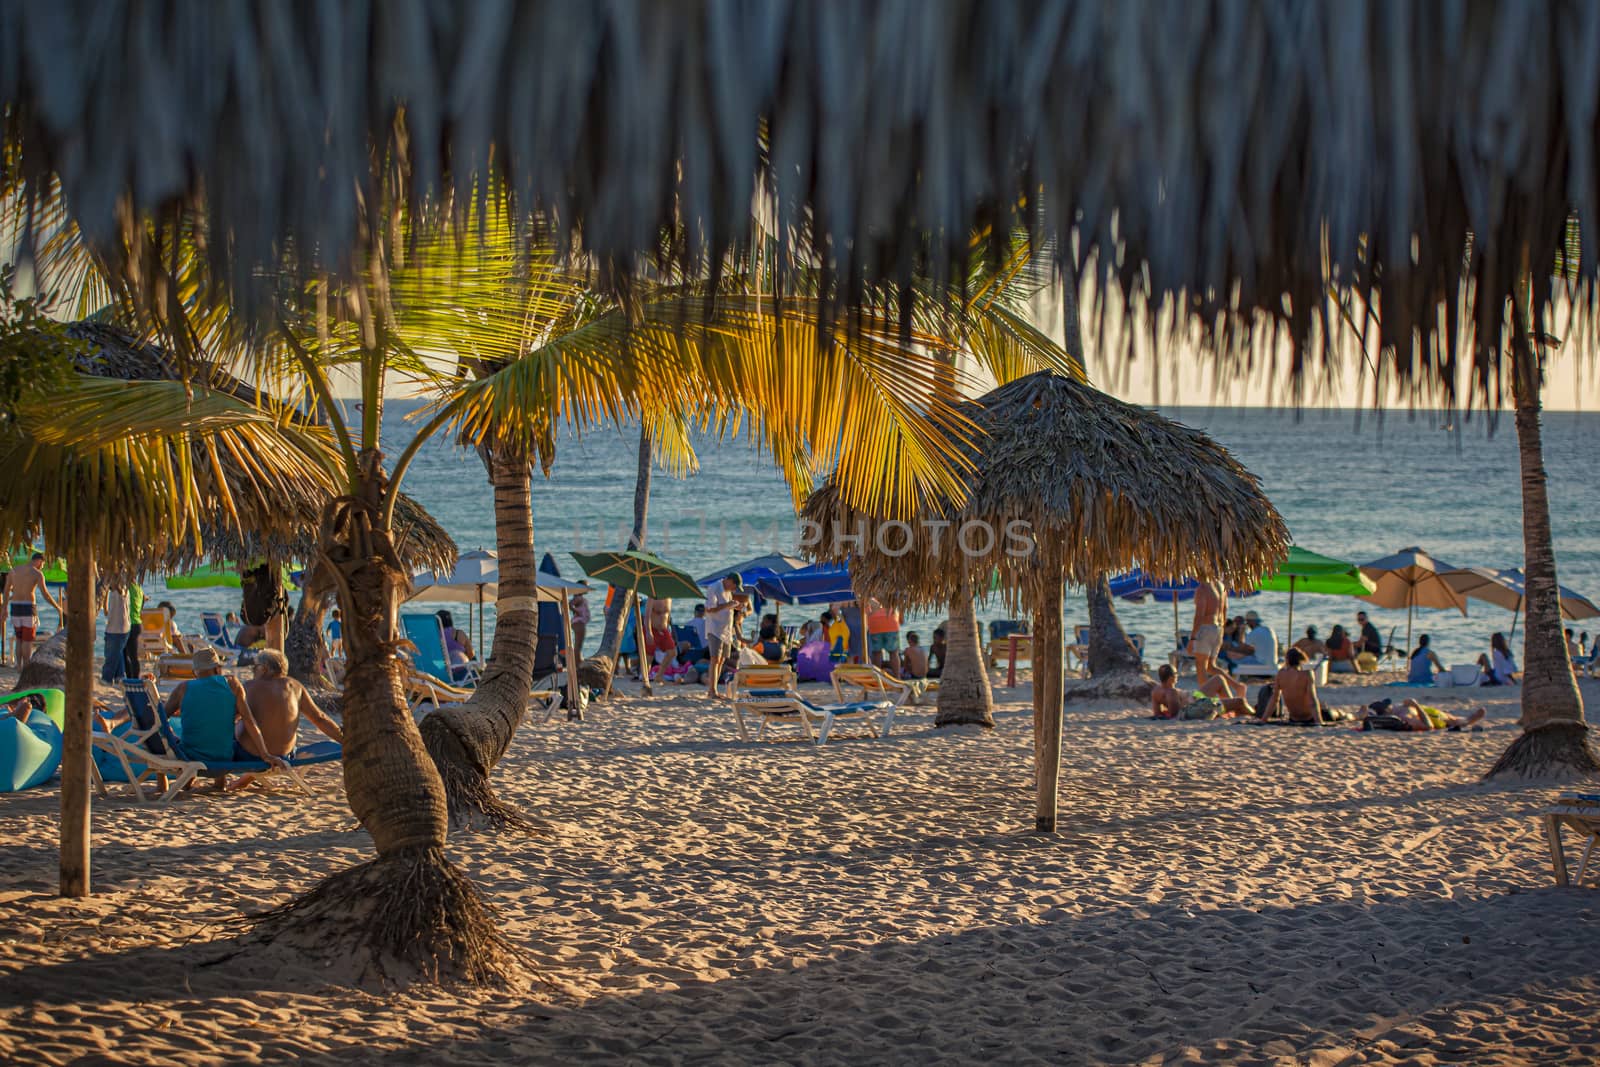 People on Dominicus Beach at sunset 11 by pippocarlot